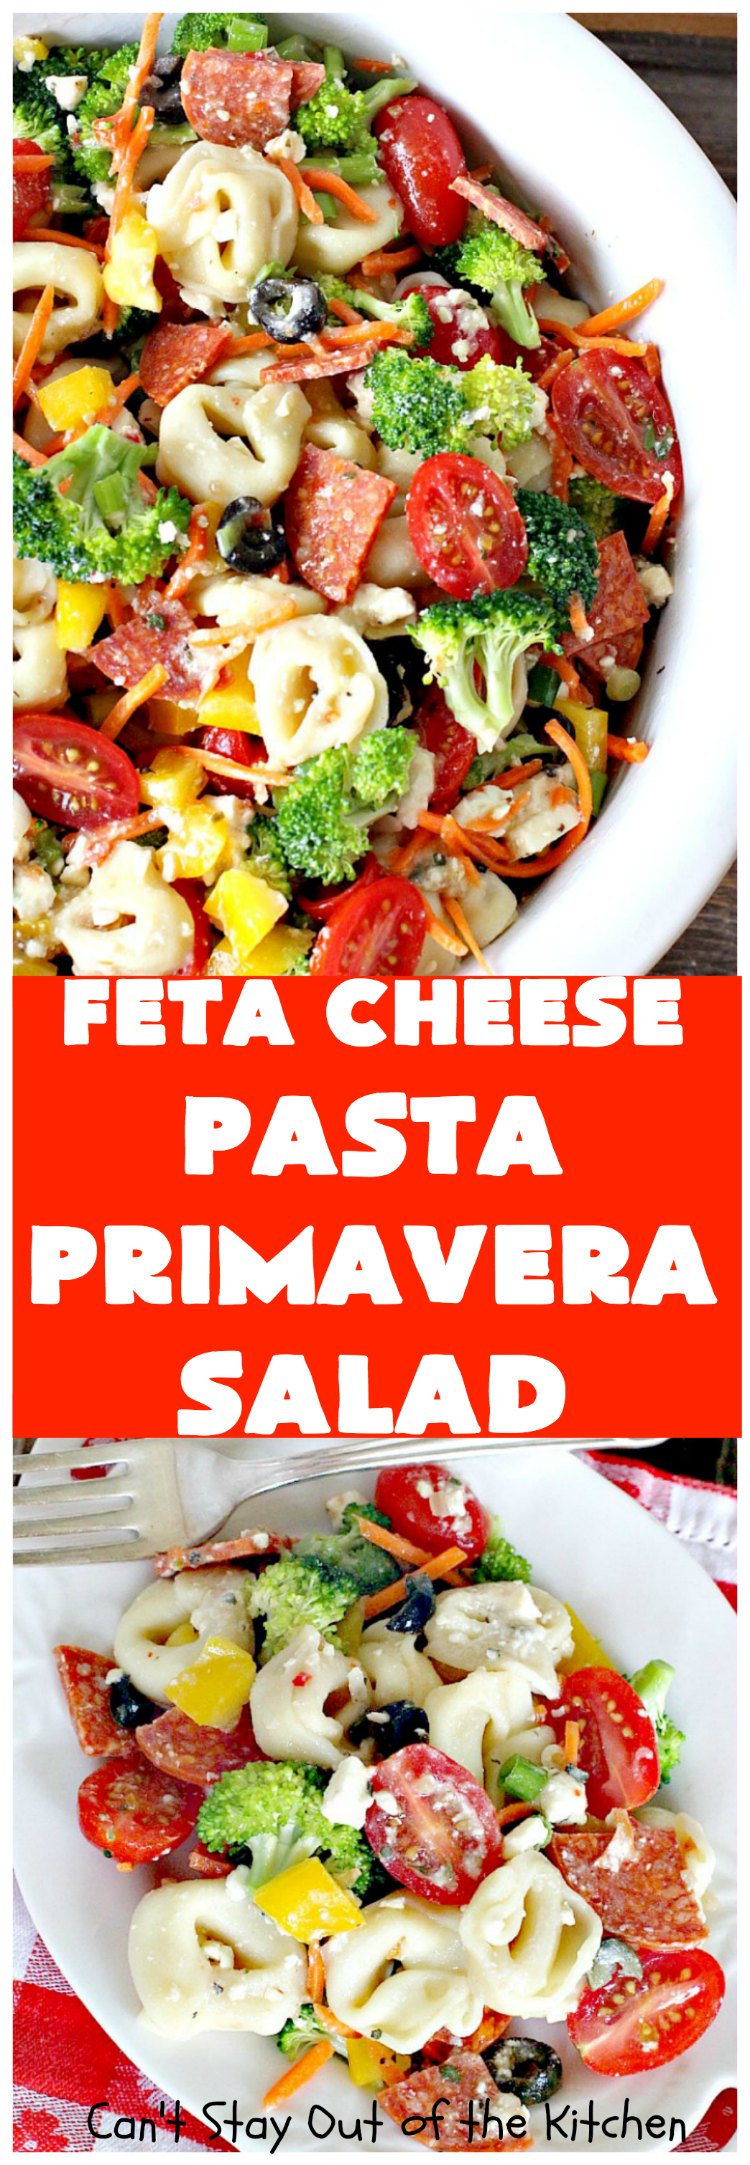 Feta Cheese Pasta Primavera Salad | Can't Stay Out of the Kitchen